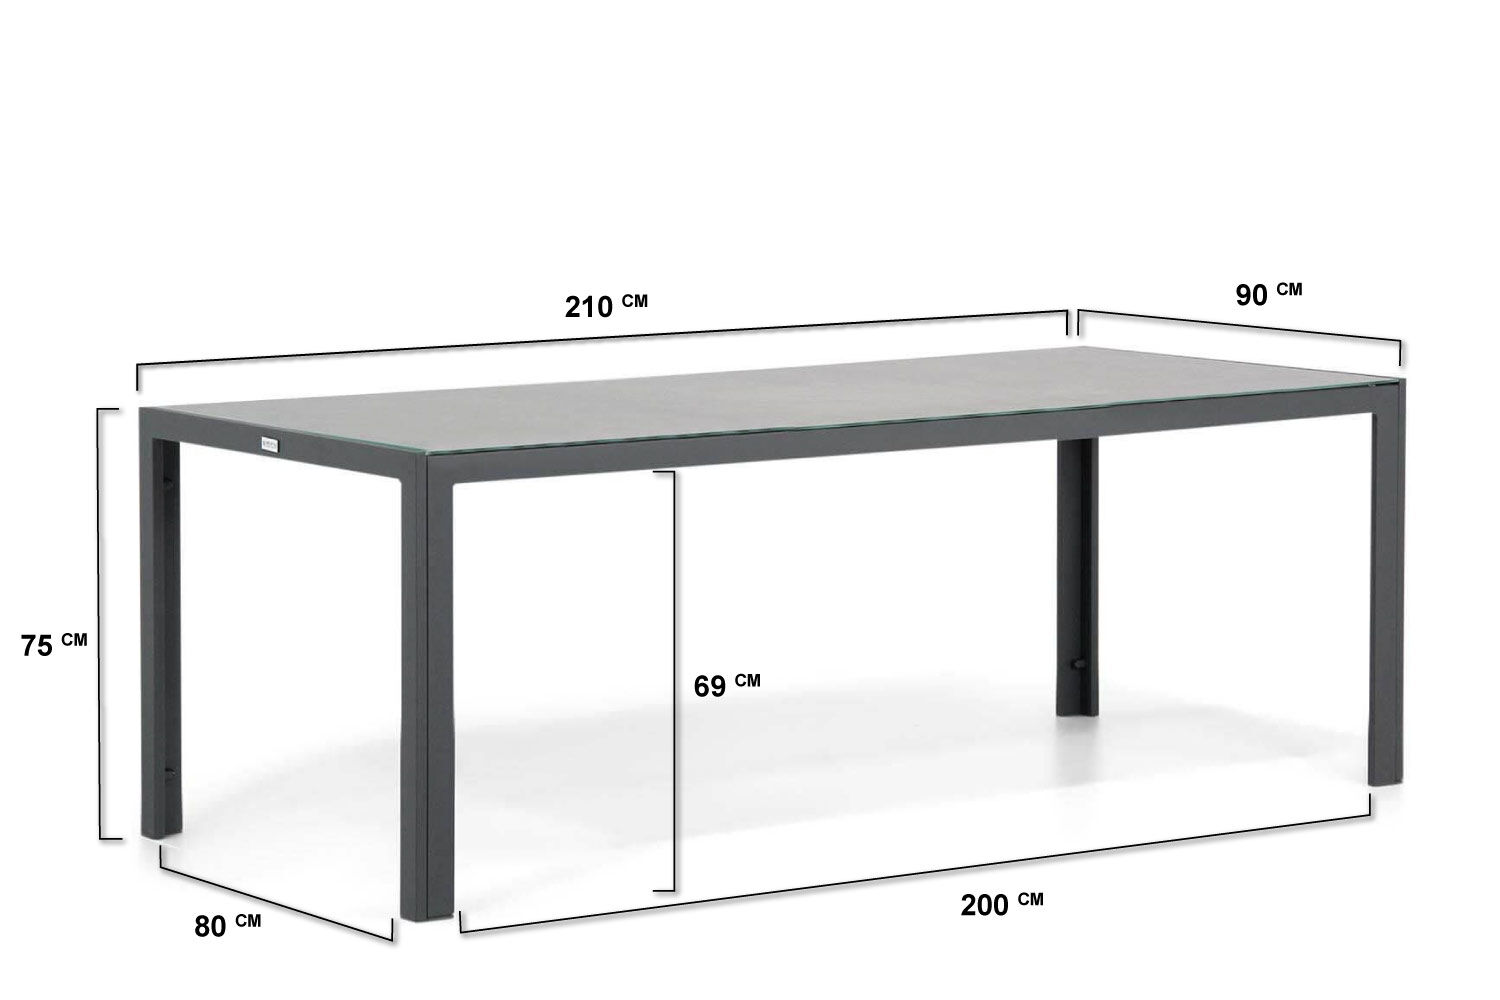 Lifestyle Ultimate/Varano 210 cm dining tuinset 7-delig